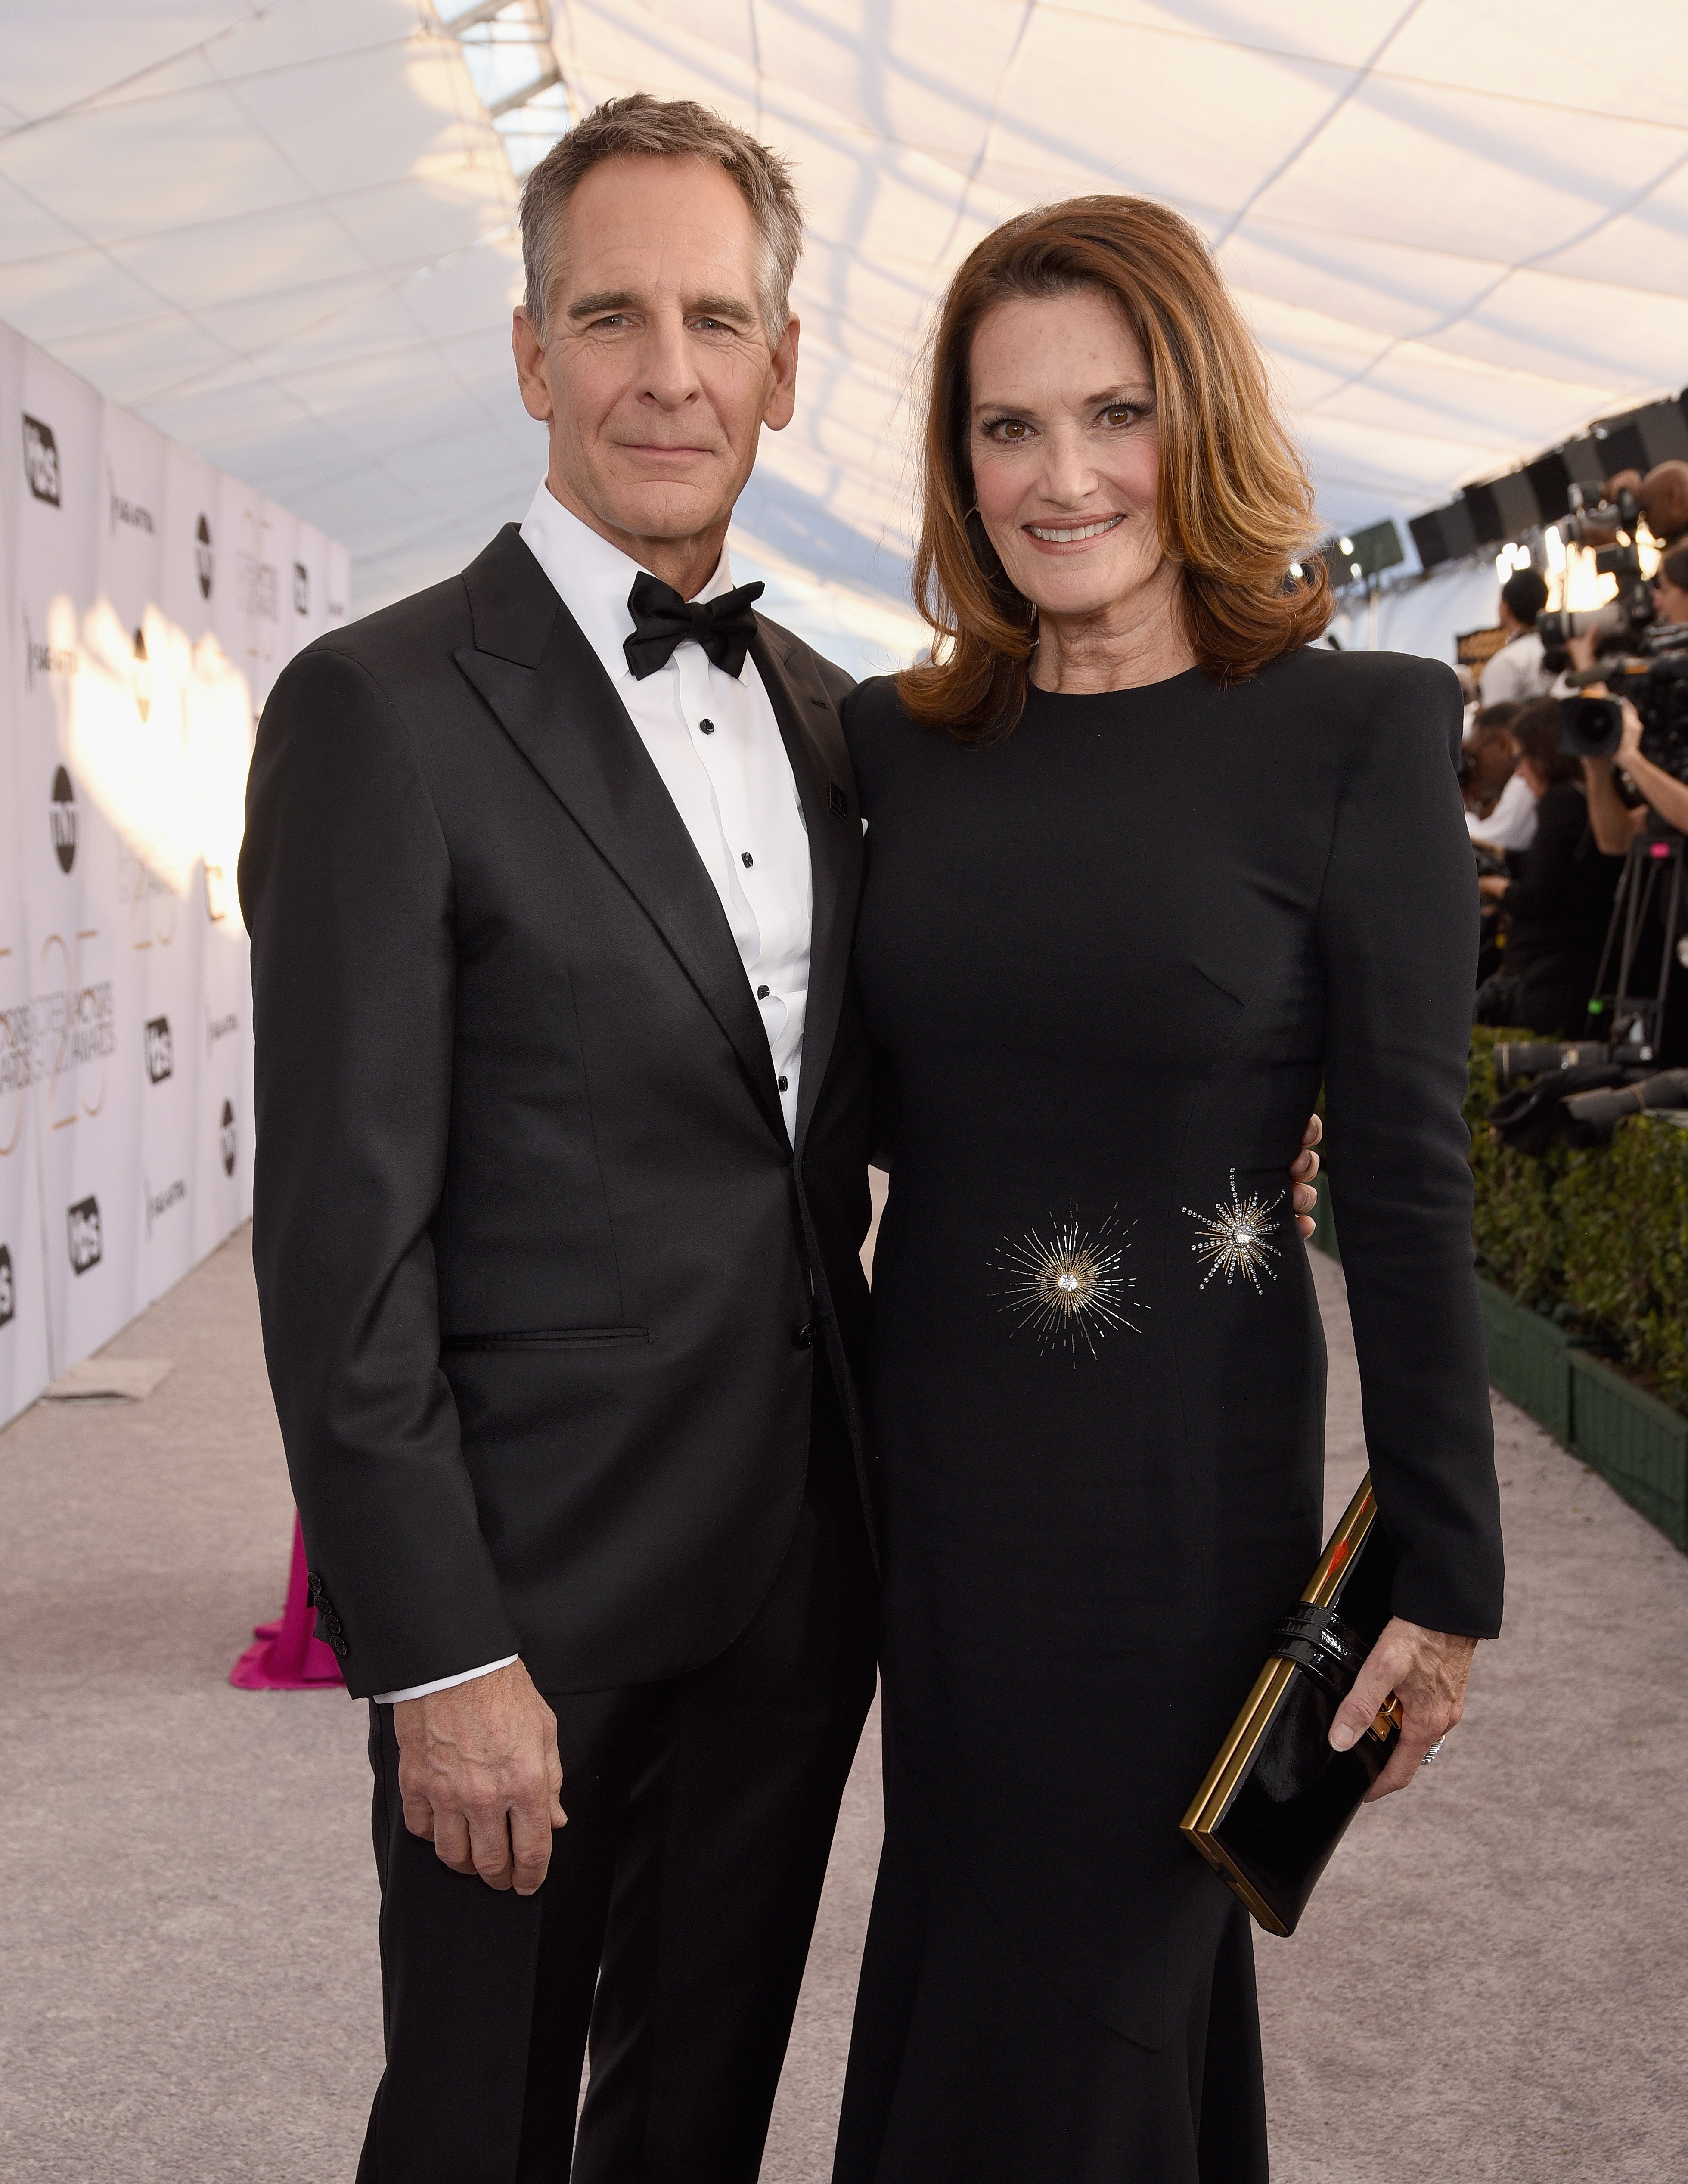 Scott Bakula and Chelsea Field at the 25th Annual Screen Actors Guild Awards on January 27, 2019  | Source: Getty Images